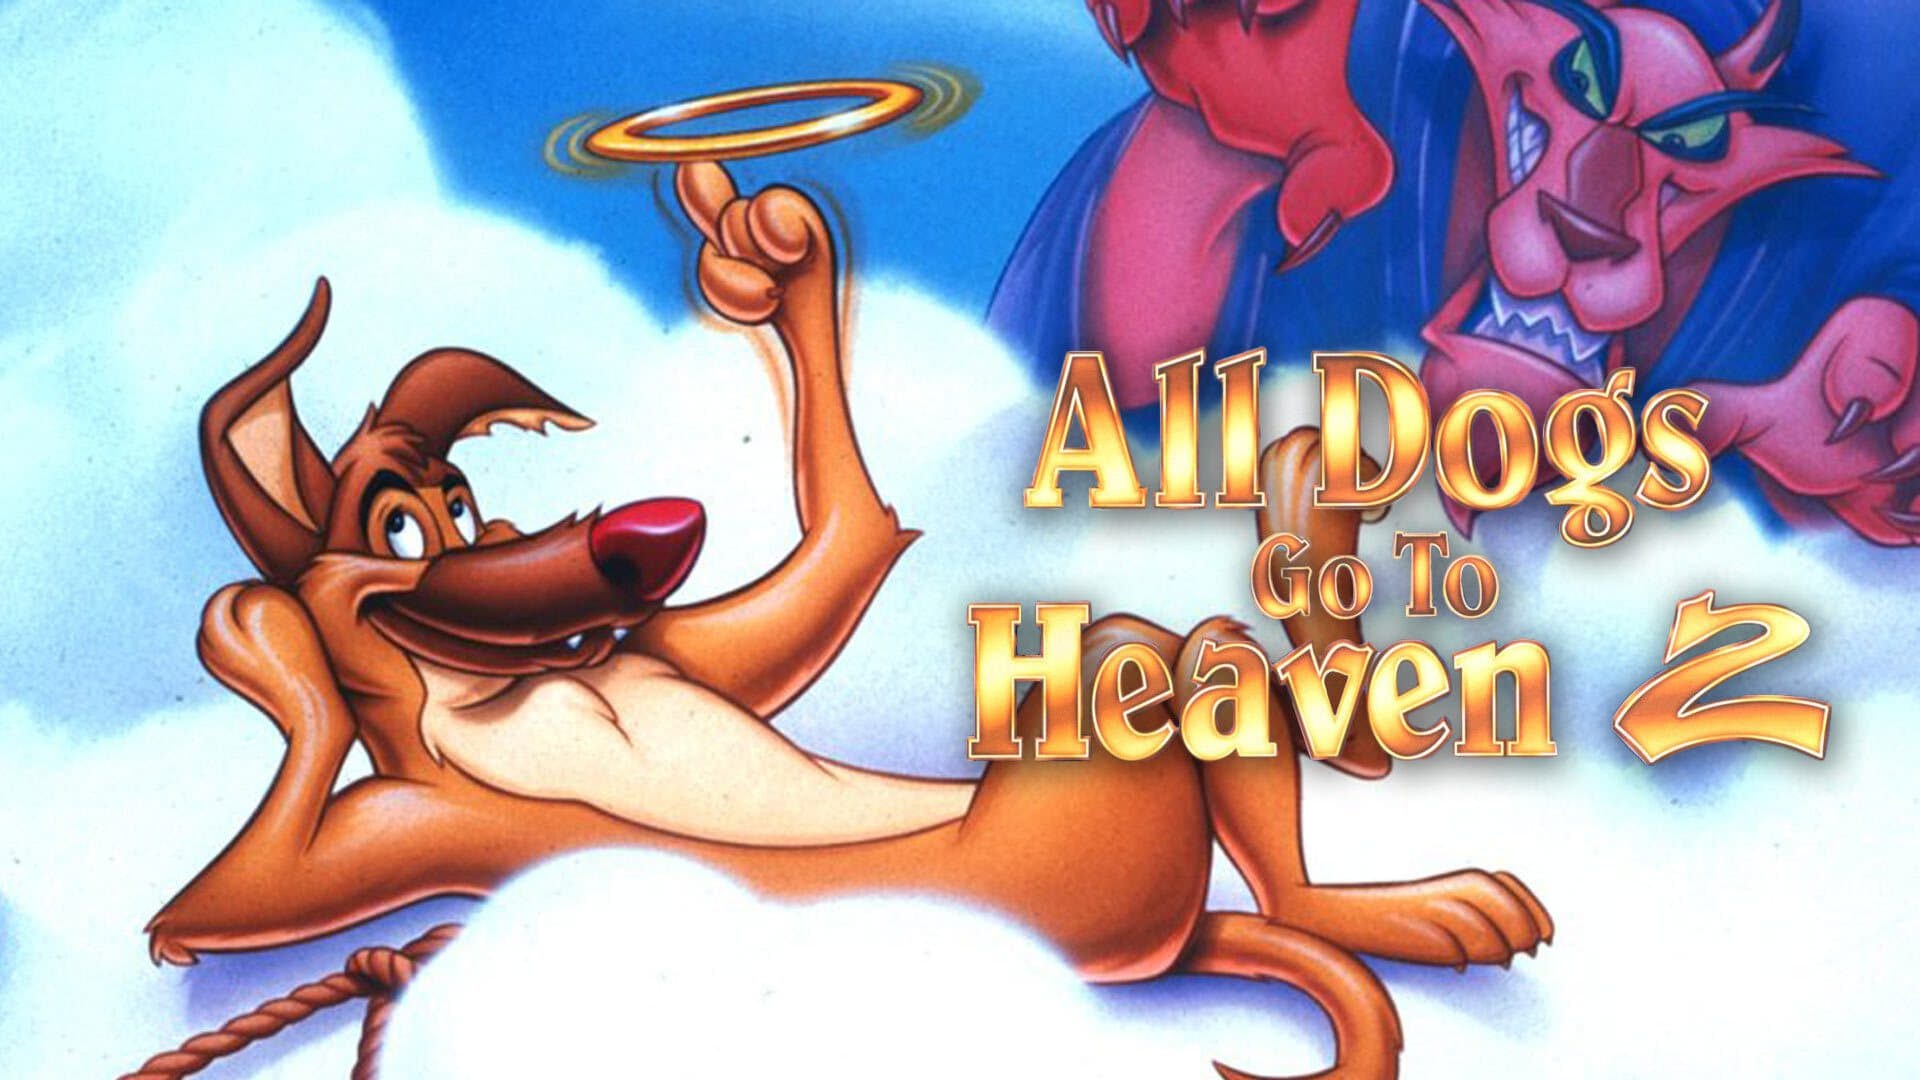 All Dogs Go to Heaven, Movie streaming online, Watch, Animation, 1920x1080 Full HD Desktop